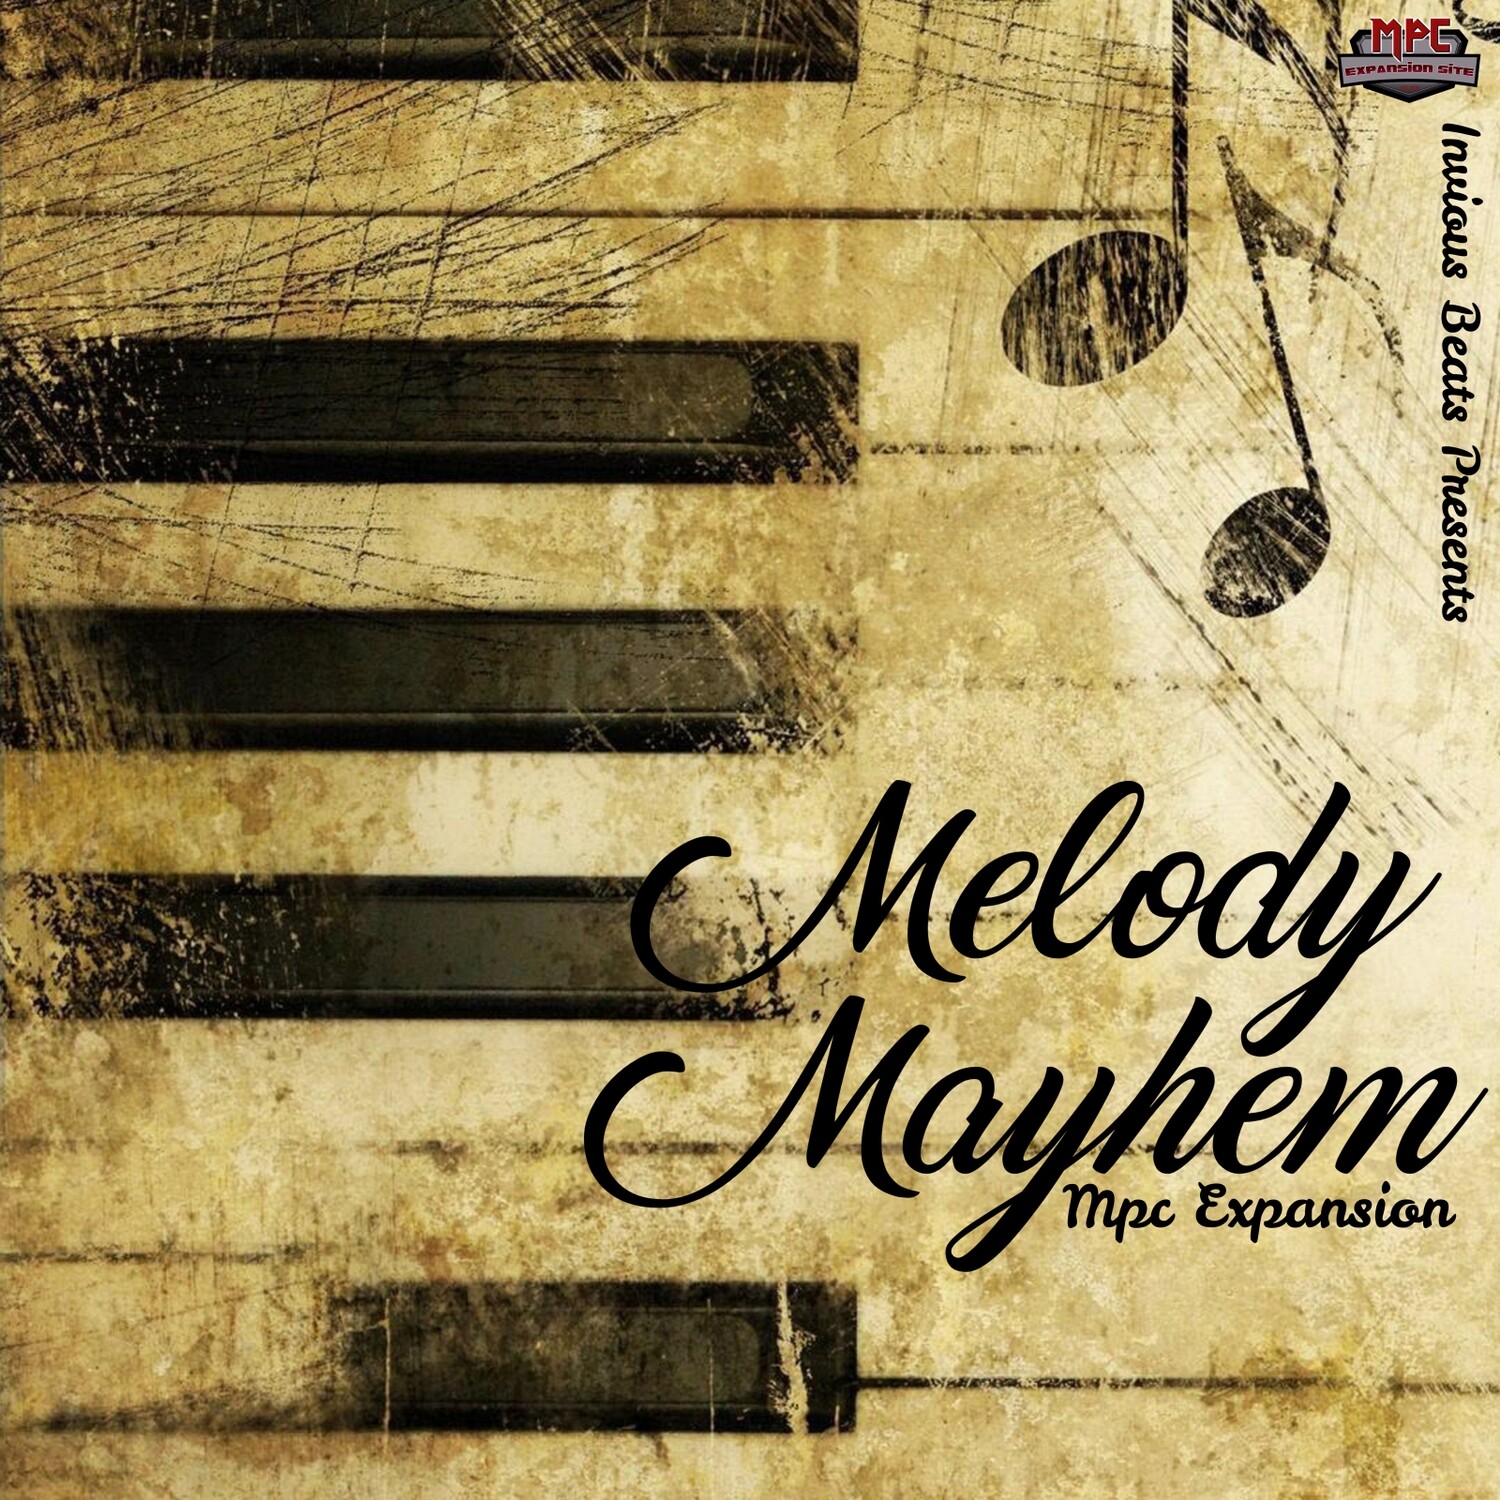 MPC EXPANSION 'MELODY MAYHAM' by INVIOUS